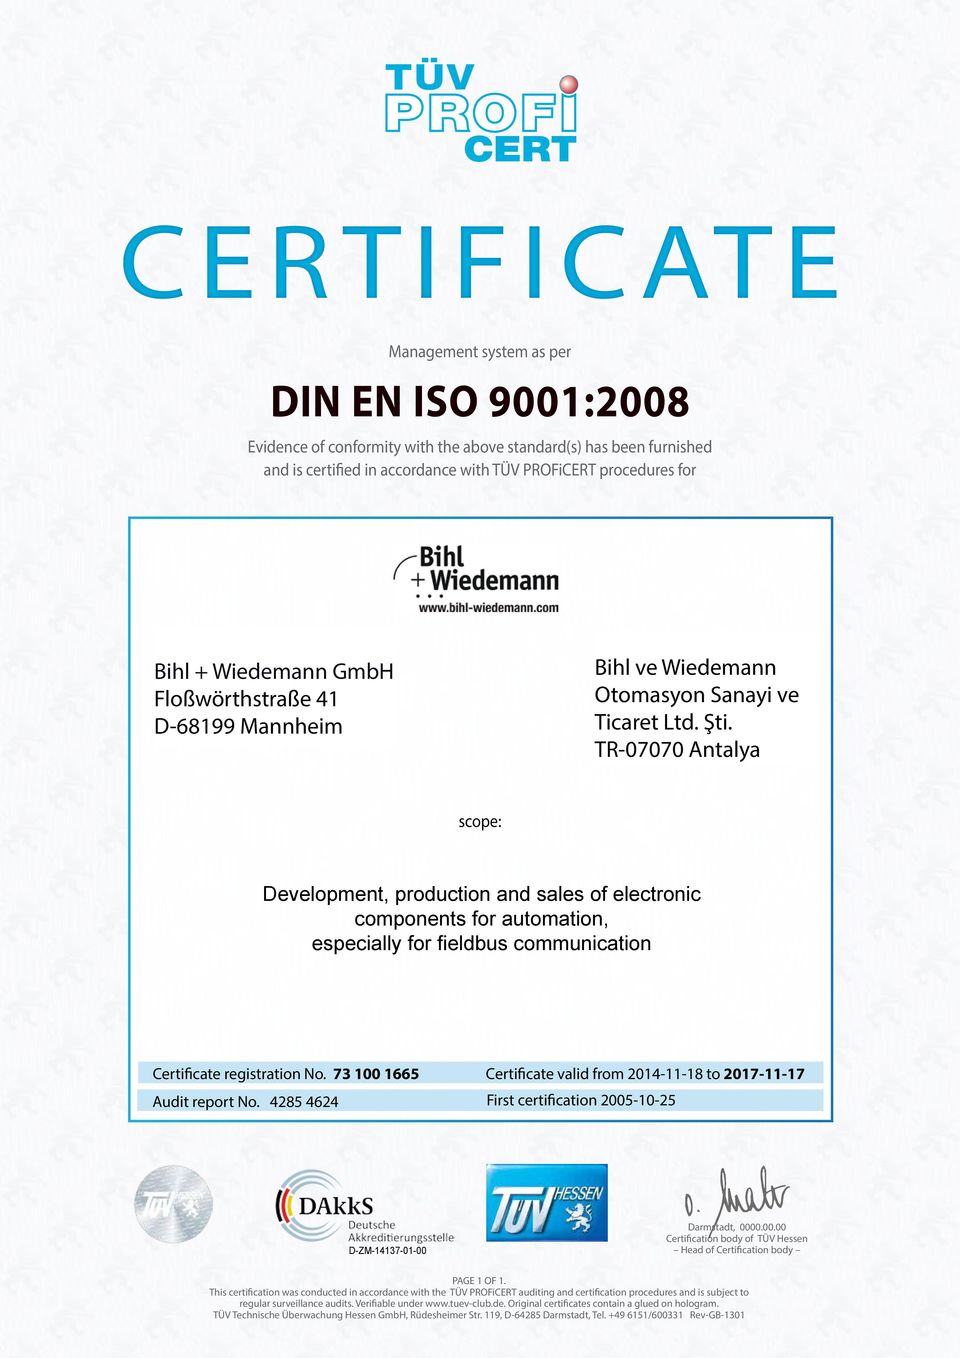 73 100 1665 Certificate valid from 2014-11-18 to 2017-11-17 Audit report No. 4285 4624 First certification 2005-10-25 Darmstadt, 0000.00.00 Certification body of TÜV Hessen Head of Certification body PAGE 1 OF 1.